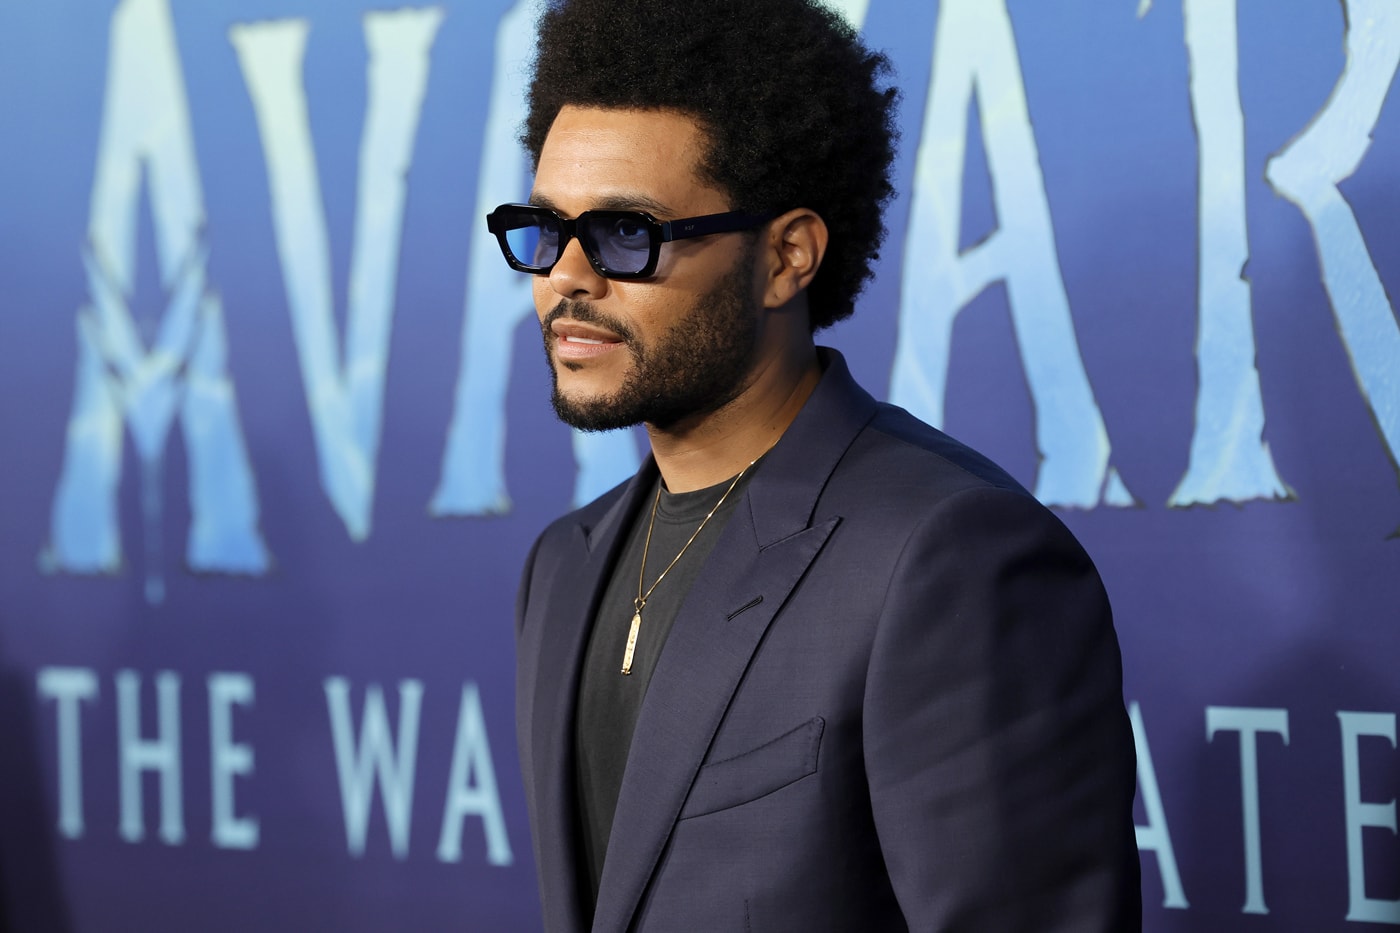 The Weeknd Settles Call Out My Name copyright Lawsuit